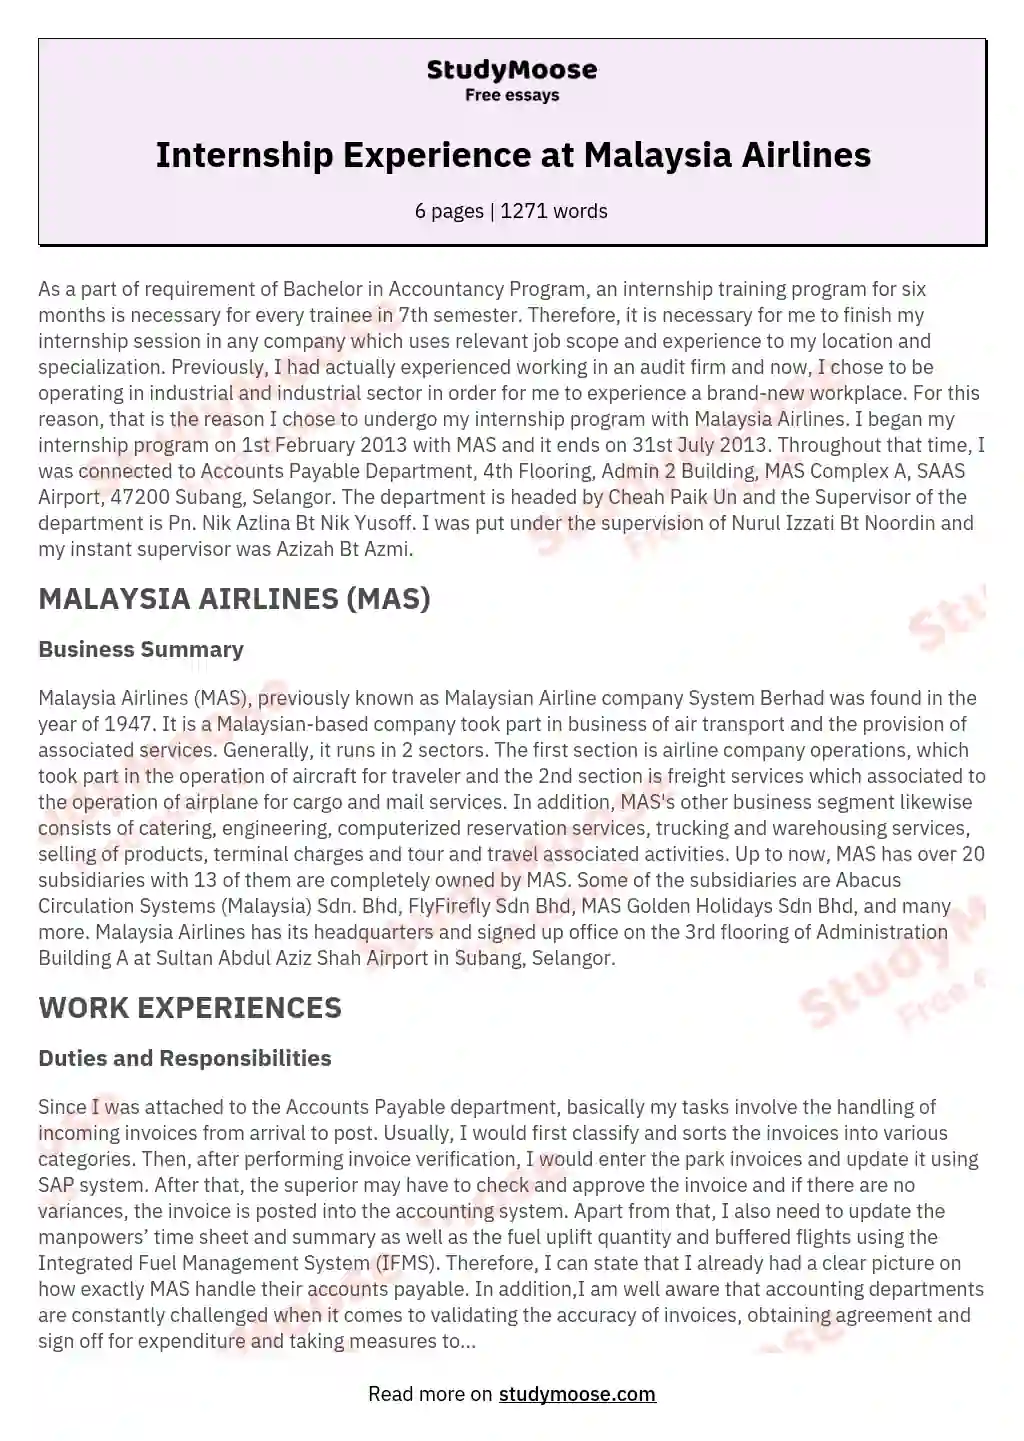 Internship Experience at Malaysia Airlines